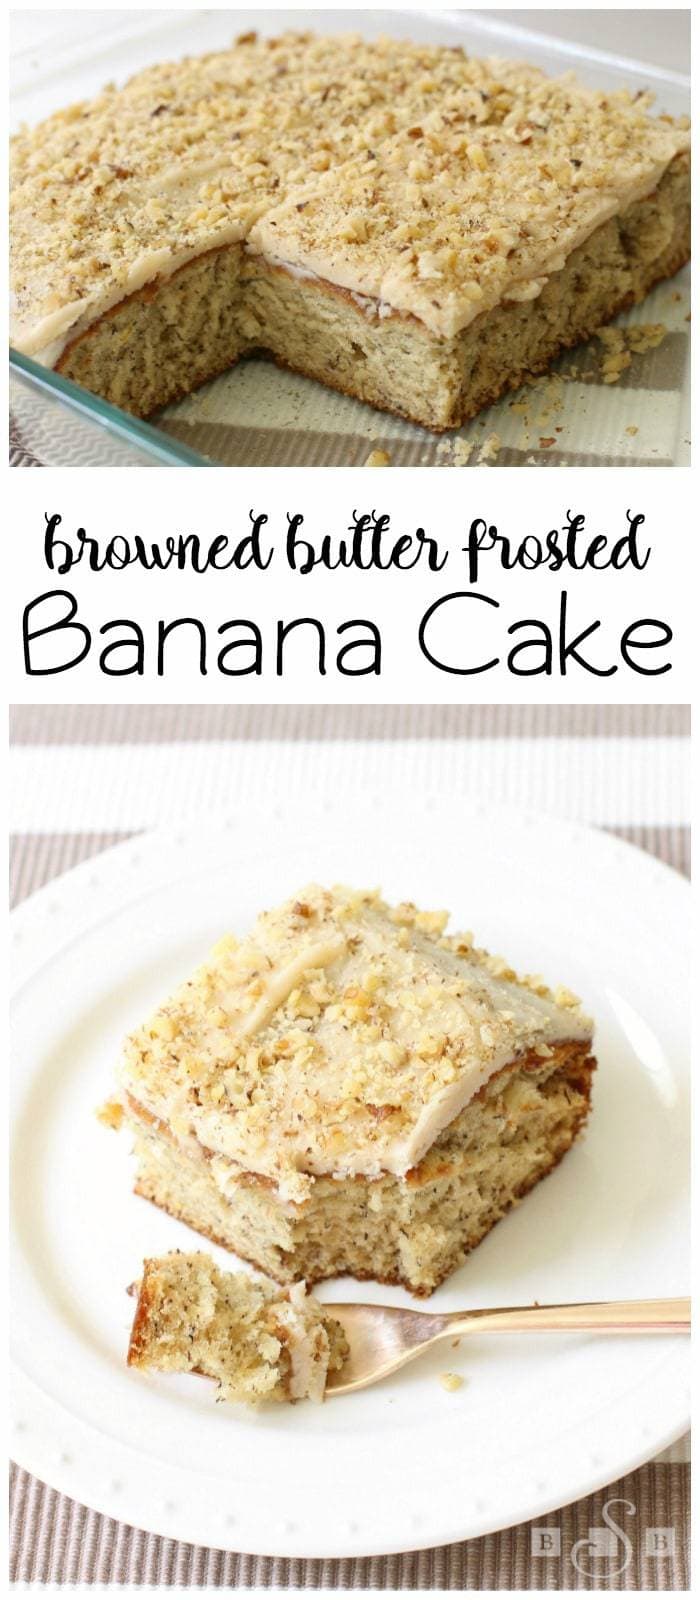 Frosted Banana Cake made from scratch in no time! Lovely banana flavor combined with rich, buttery frosting and topped with chopped nuts. Delicious moist banana cake recipe!